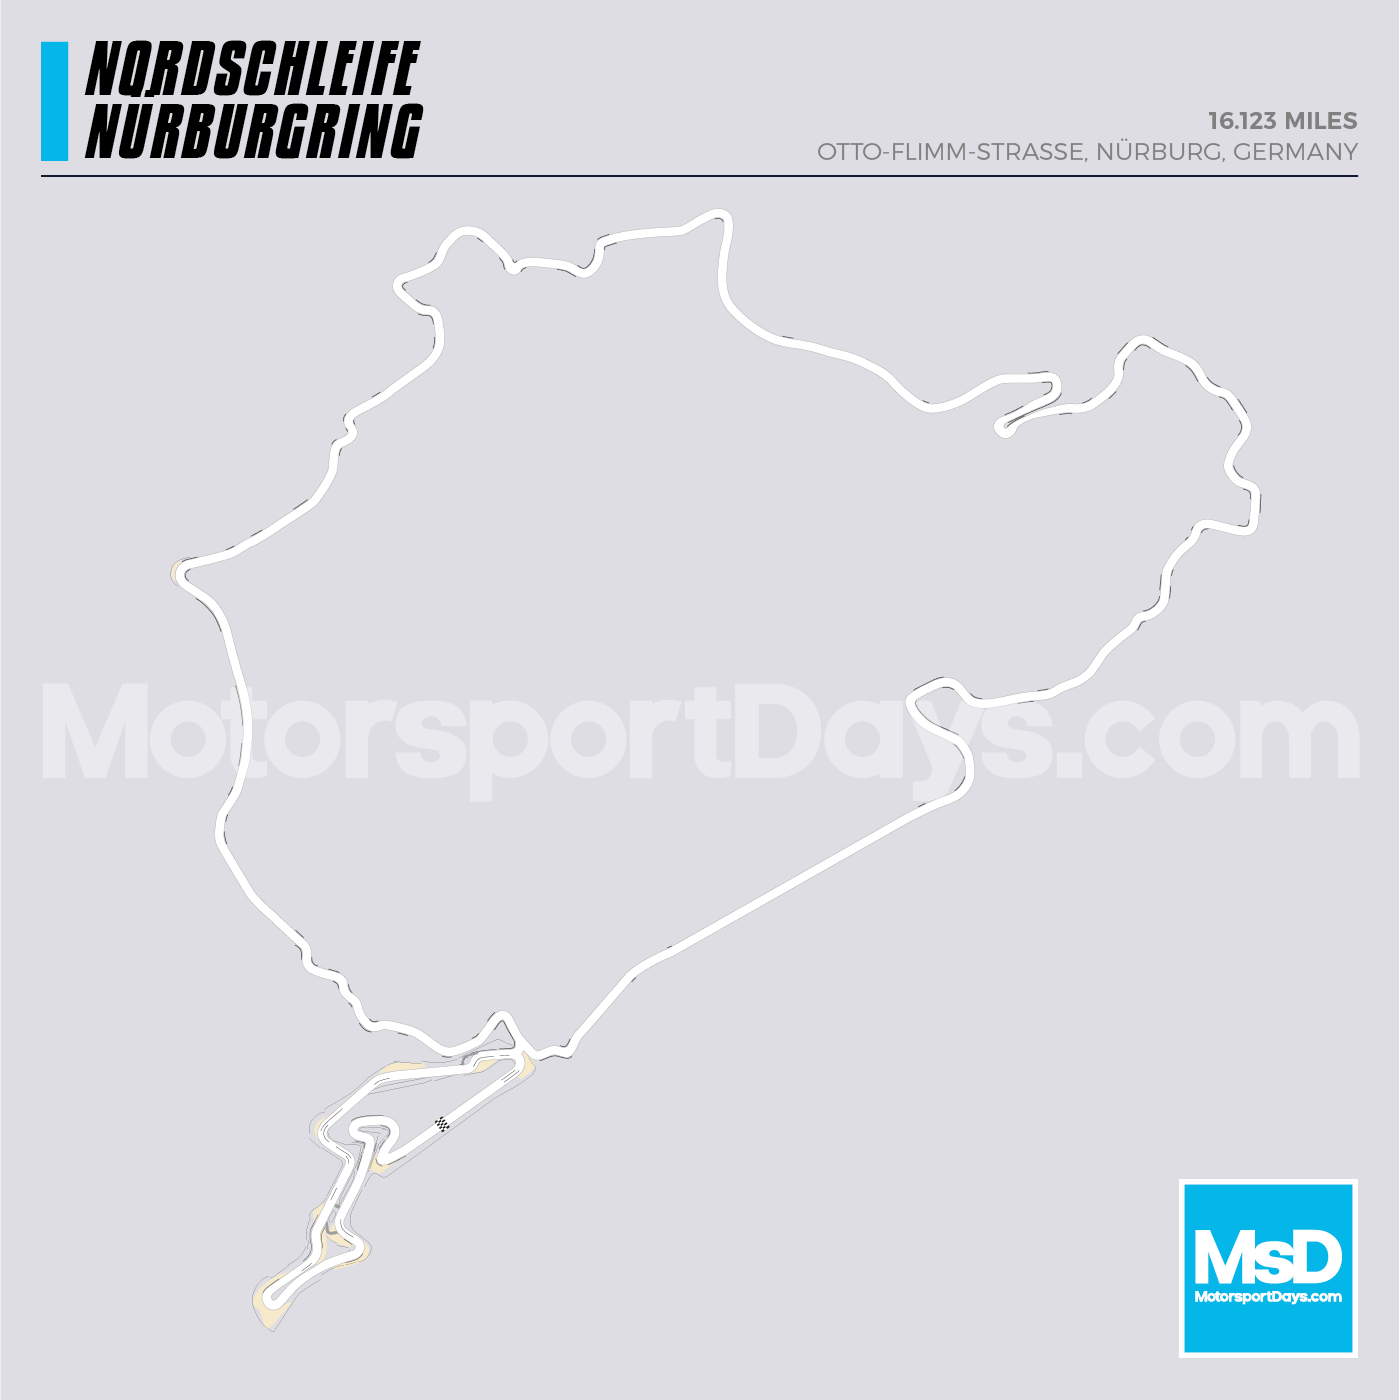 Nordschleife-Circuit-track-map